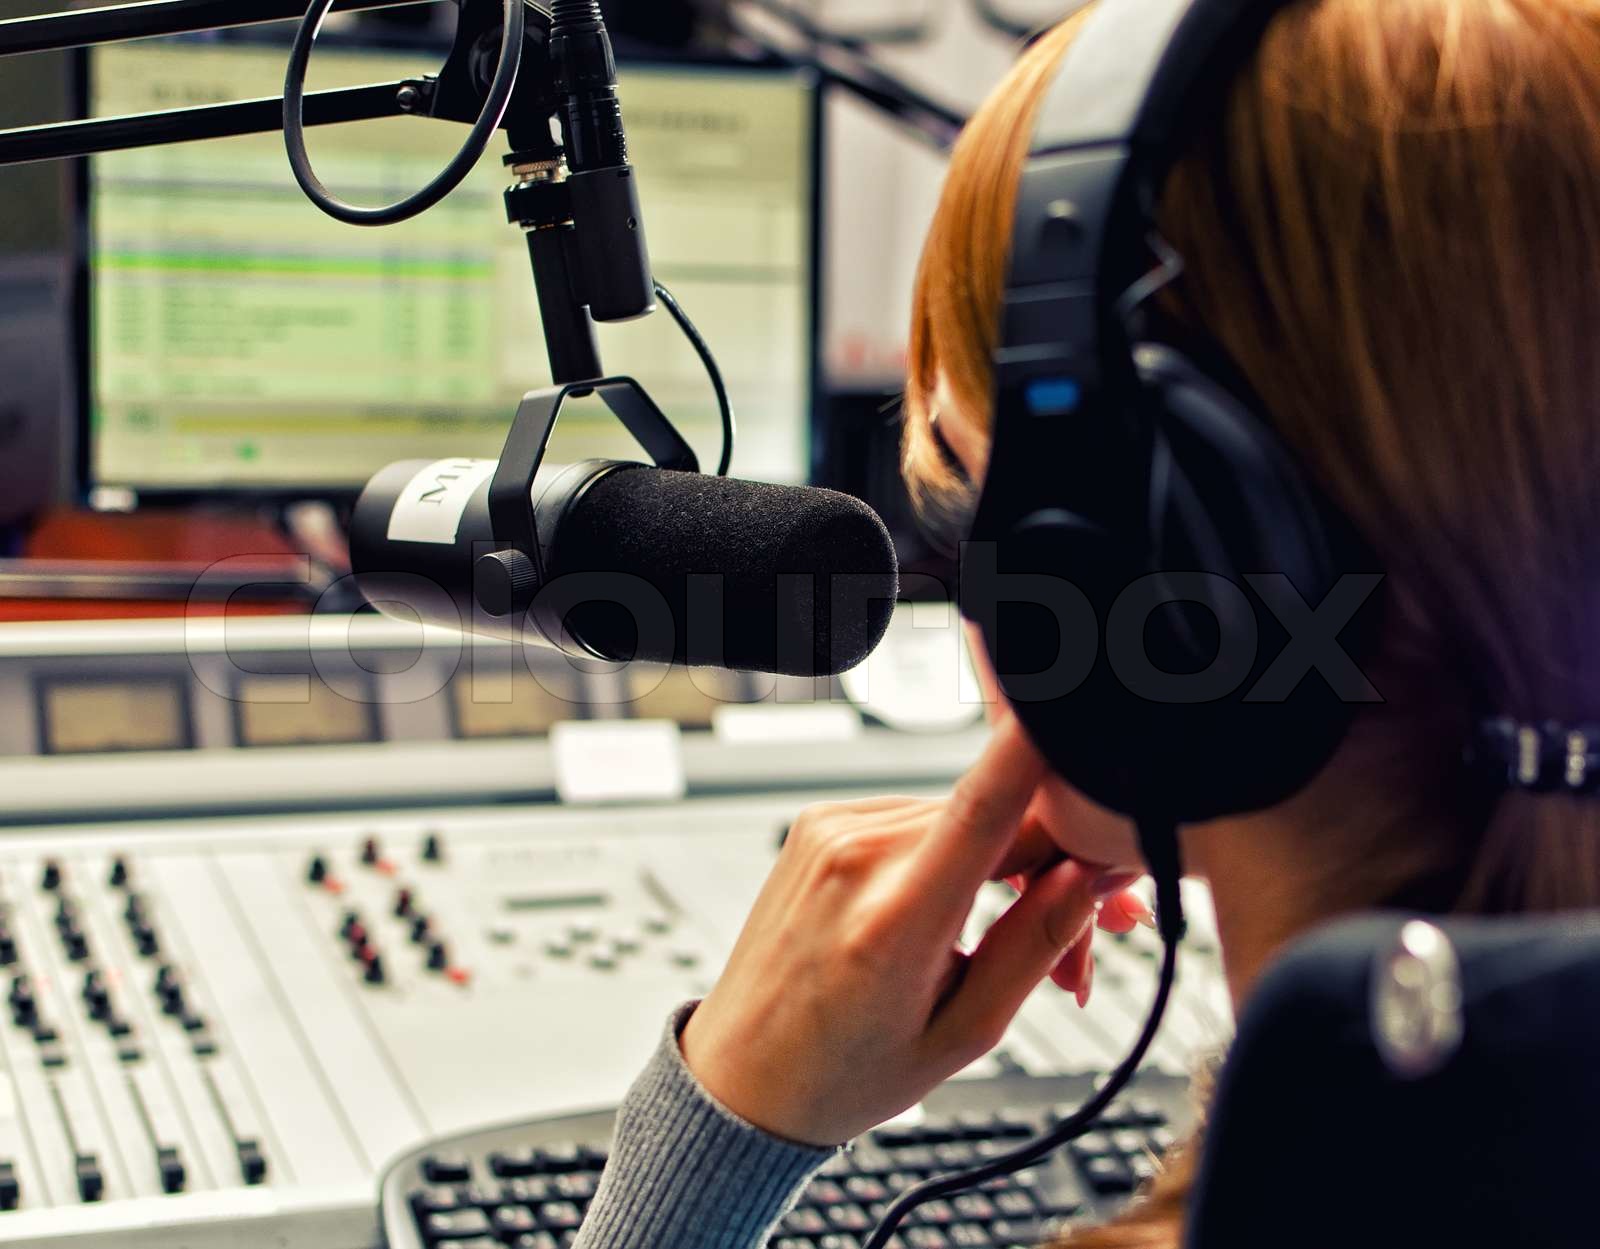 The Danish Broadcasting Corporation (DR) offers a number of PhD students from Health a test interview with radio hosts from P3 or P1. Photo: Colourbox.